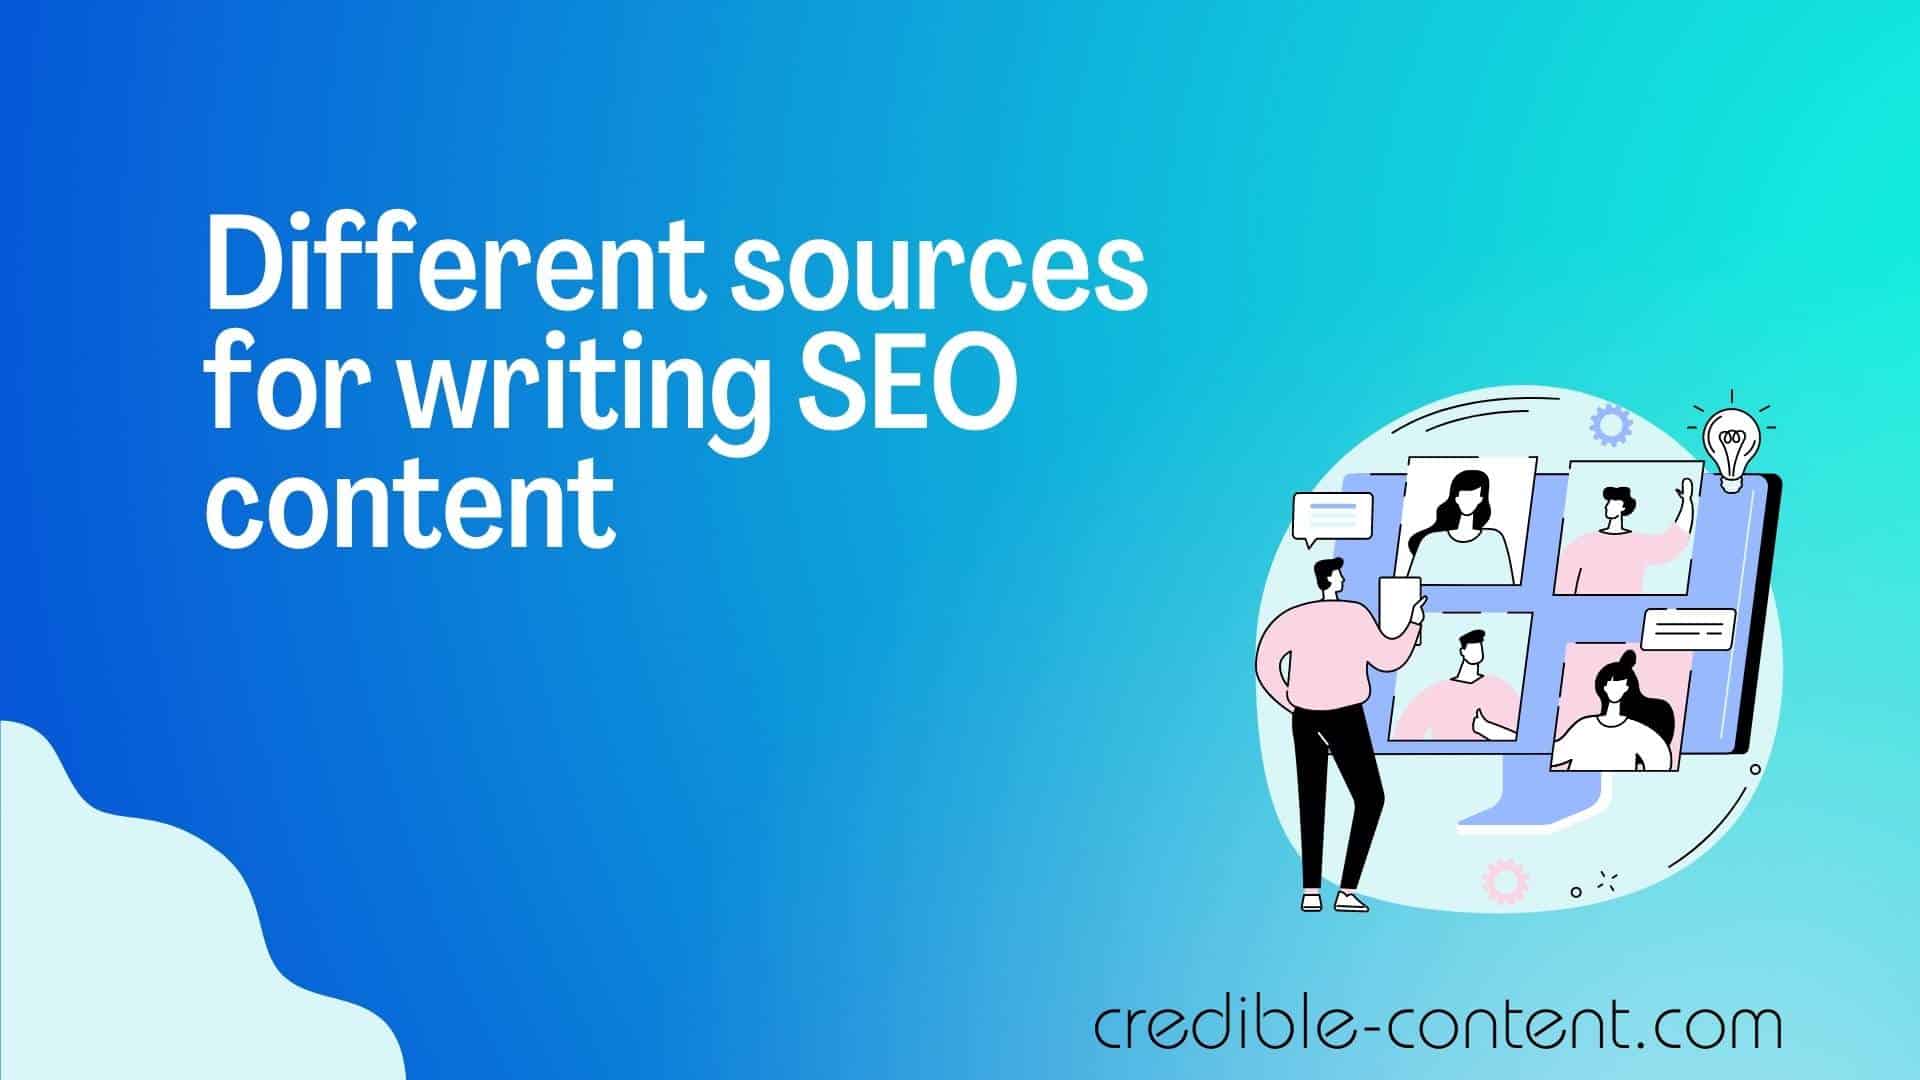 Different sources for writing SEO content